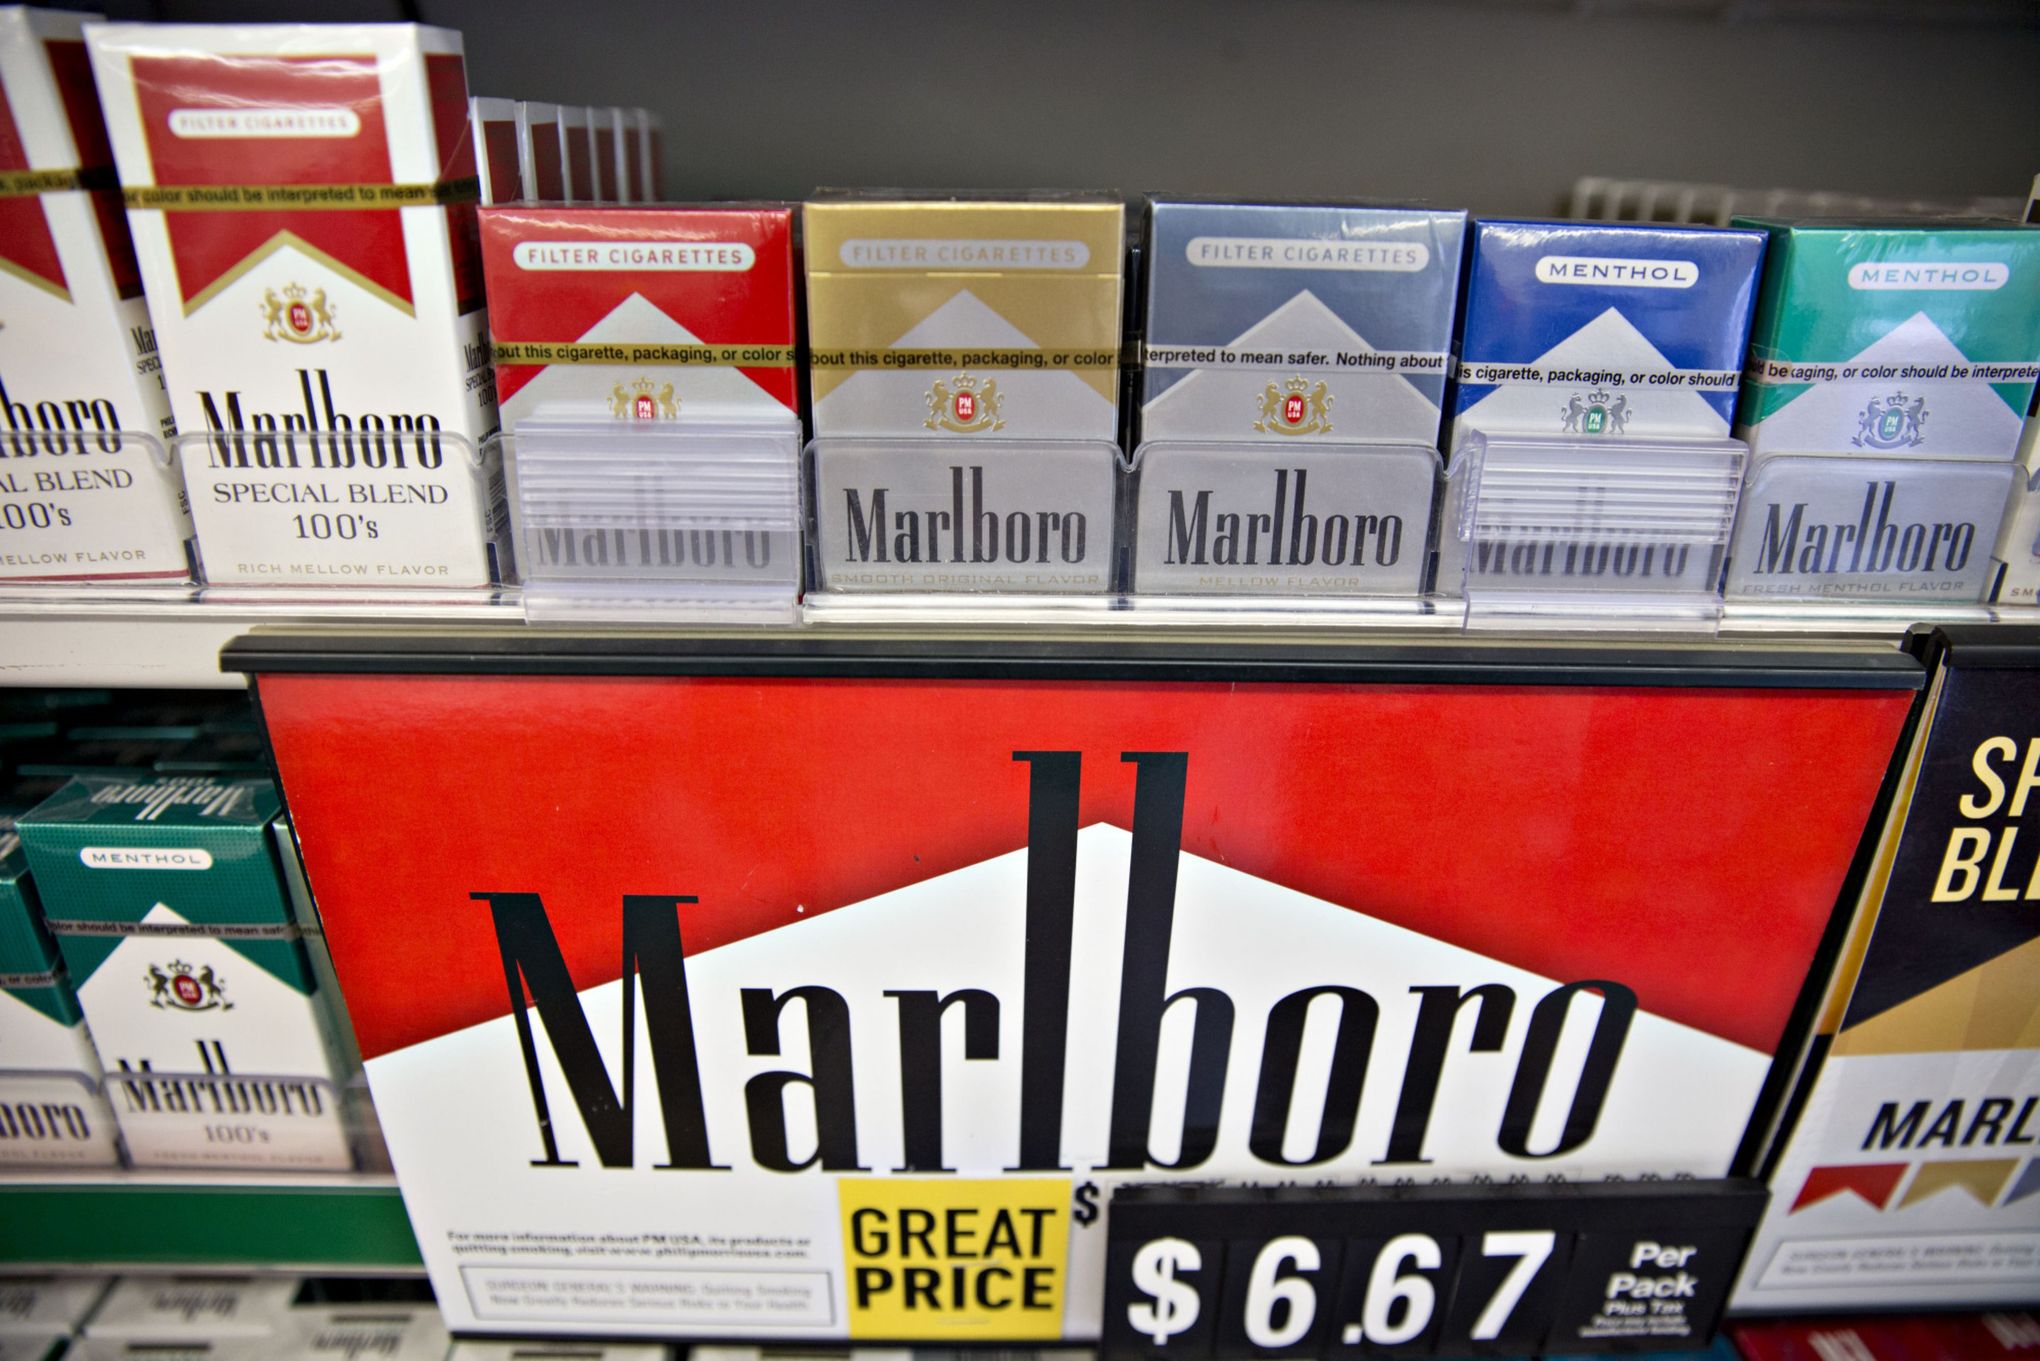 Imperial Tobacco prepares for menthol ban with series of range changes, Product News